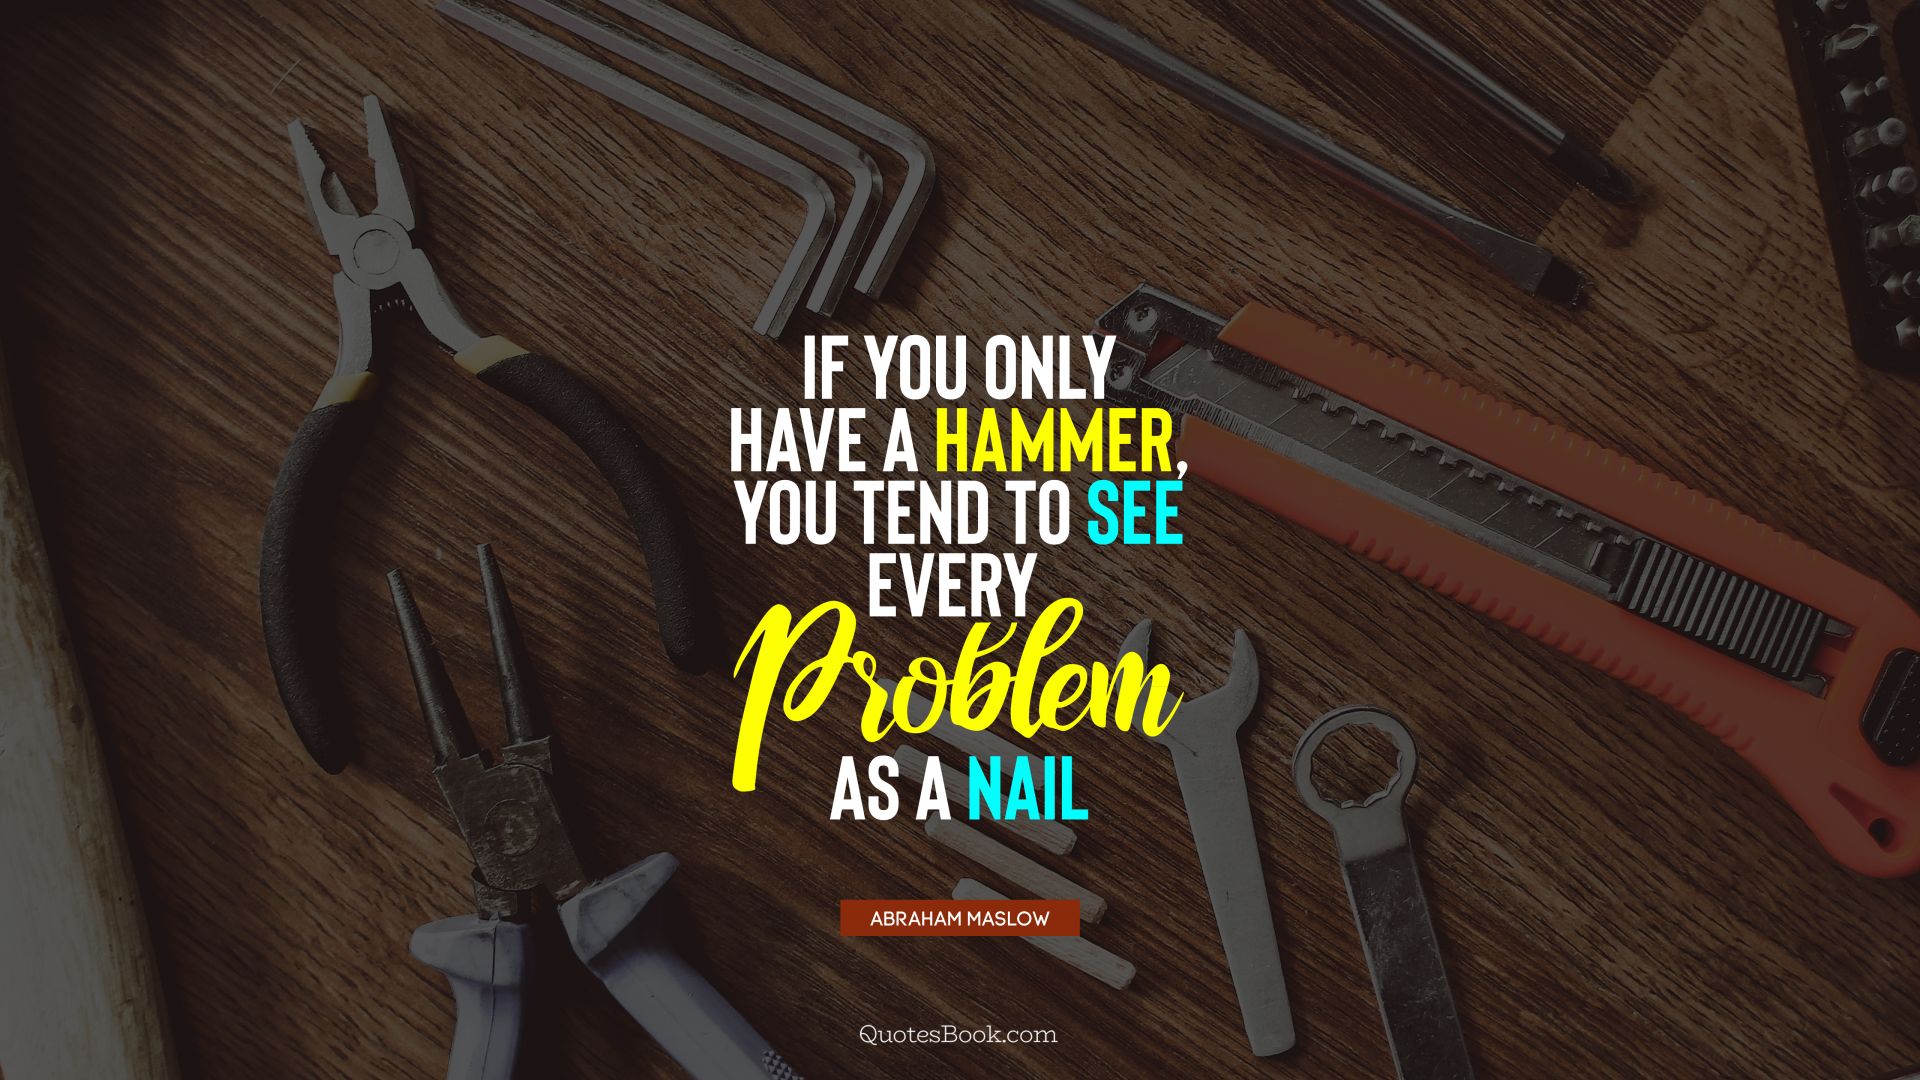 If you only have a hammer, you tend to see every problem as a nail. - Quote by Abraham Maslow